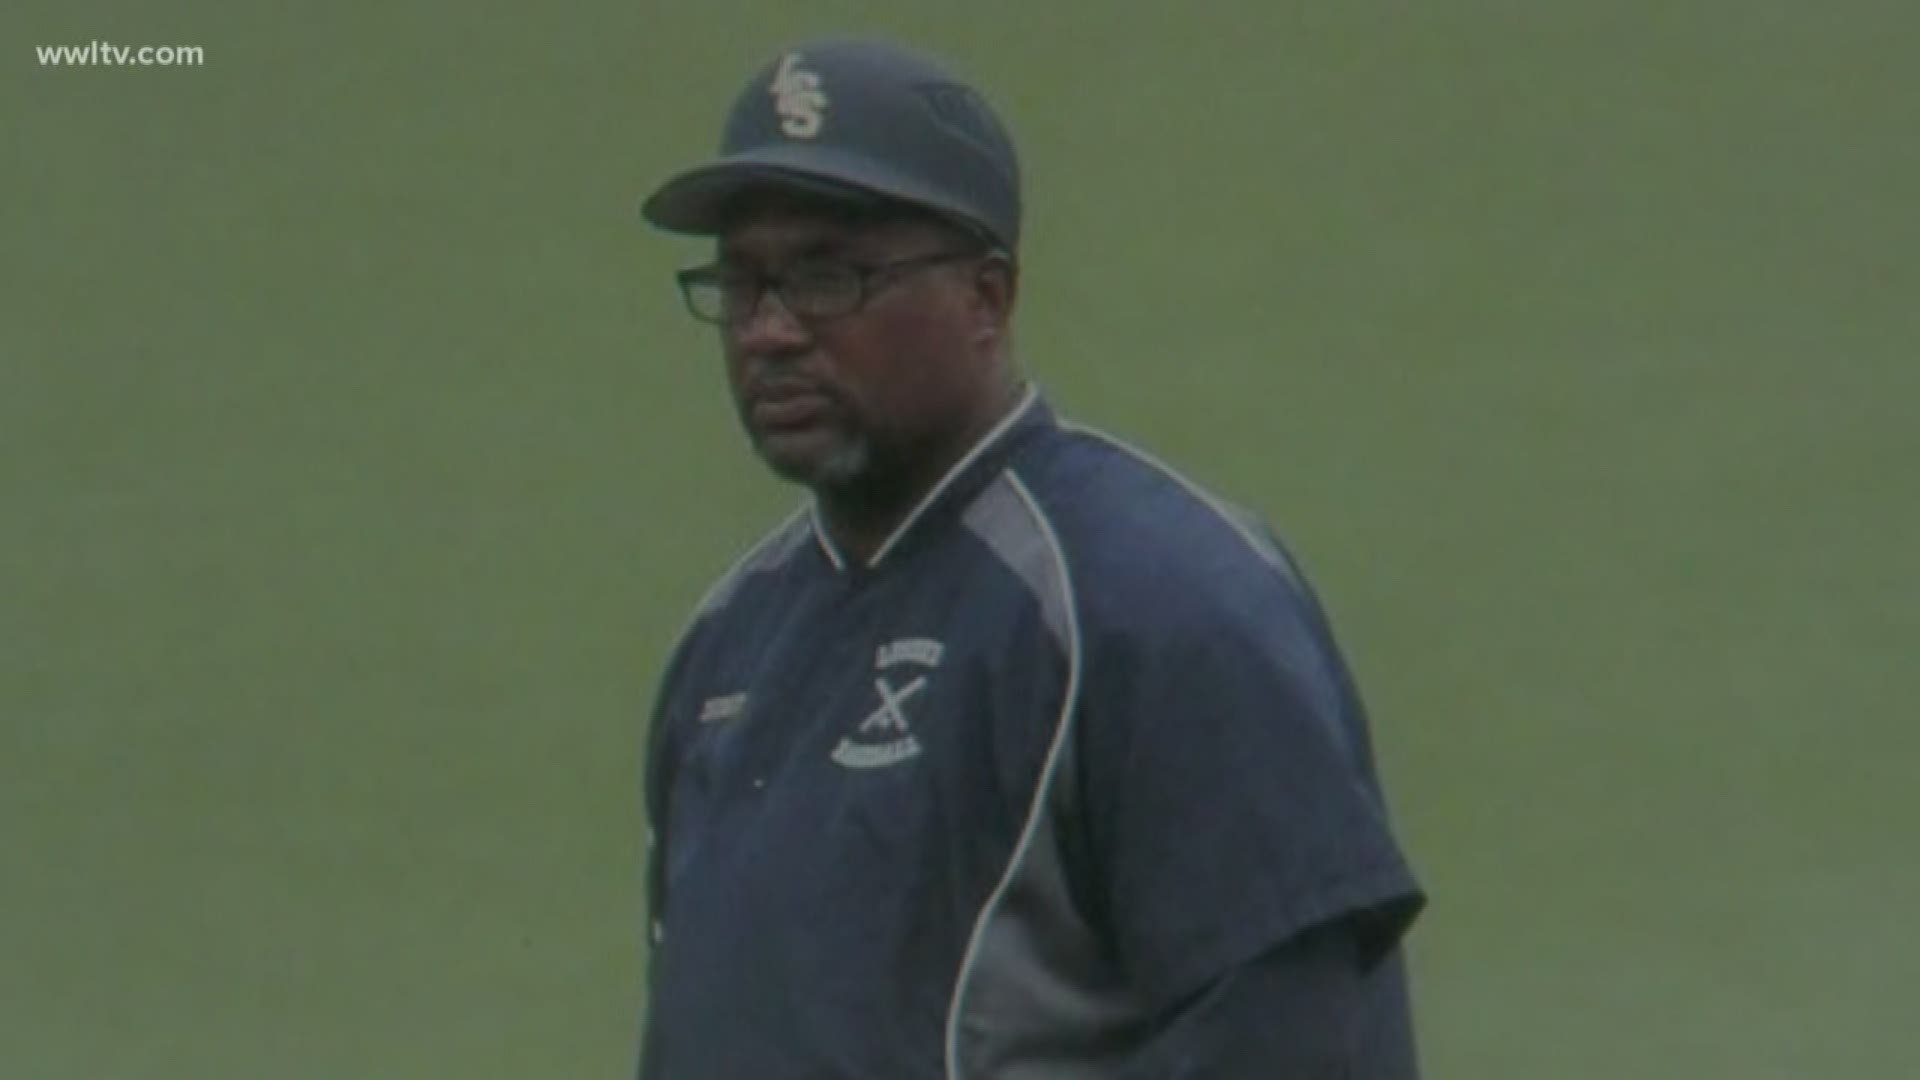 Remembering Coach Cornell Charles